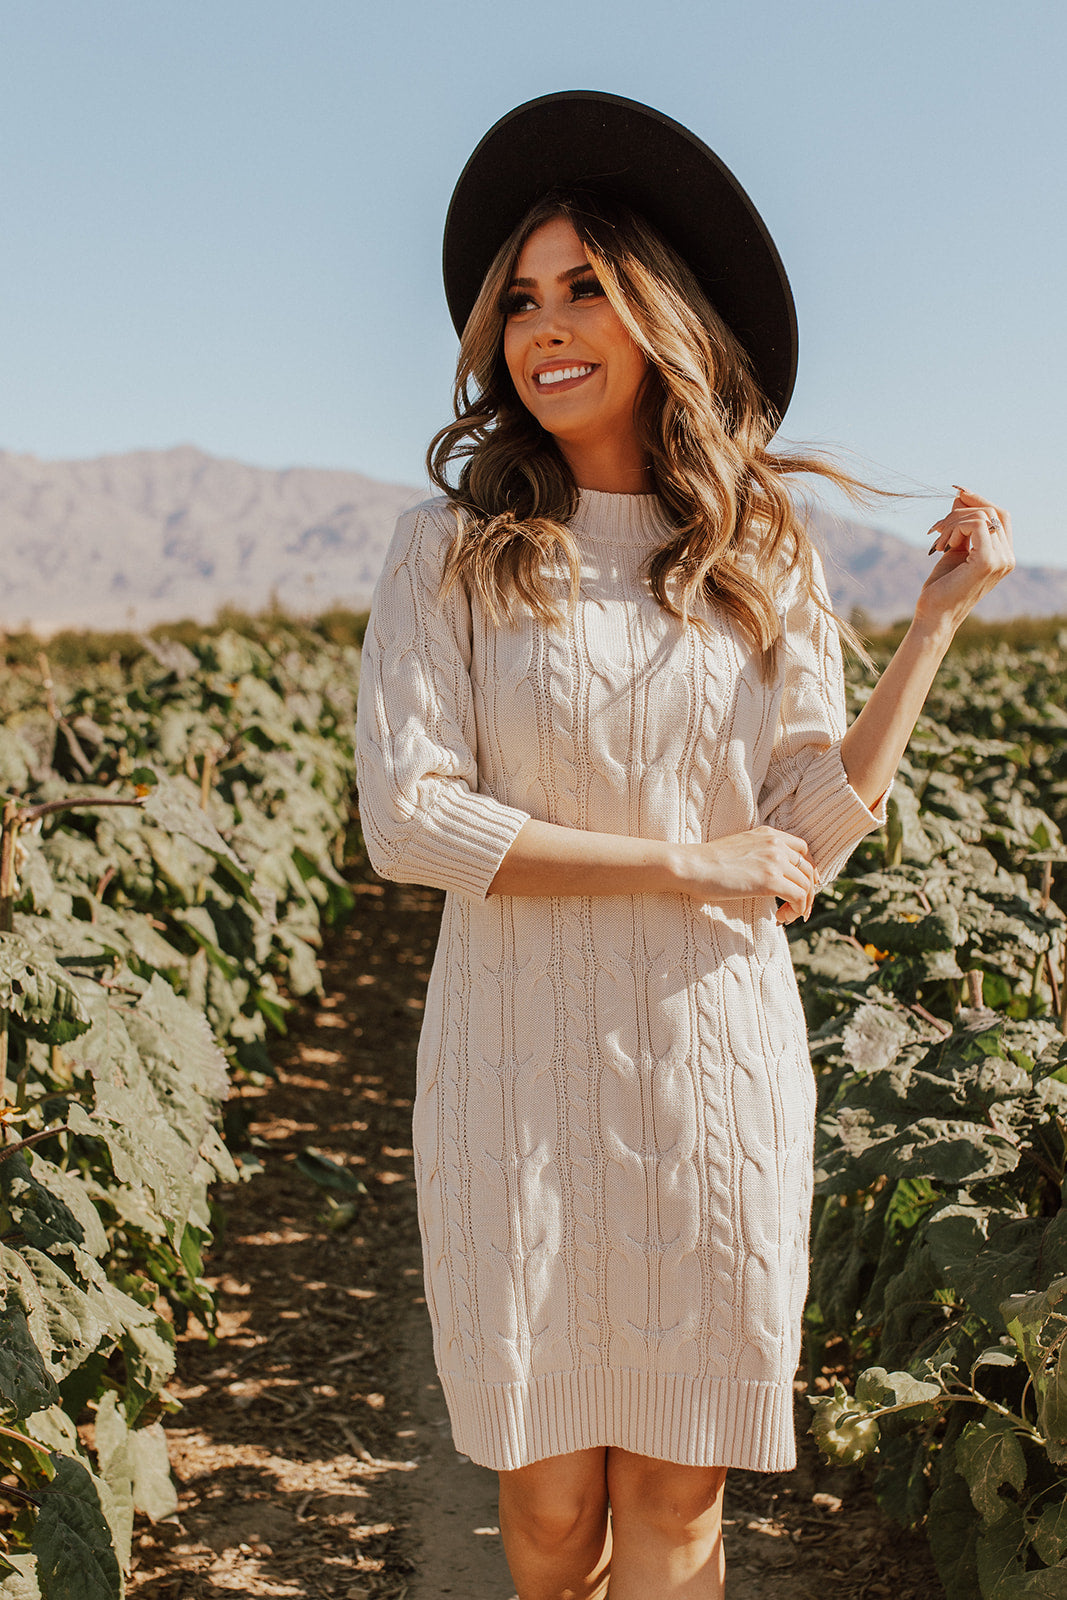 THE SWEATER WEATHER CABLE KNIT DRESS IN IVORY BY PINK DESERT